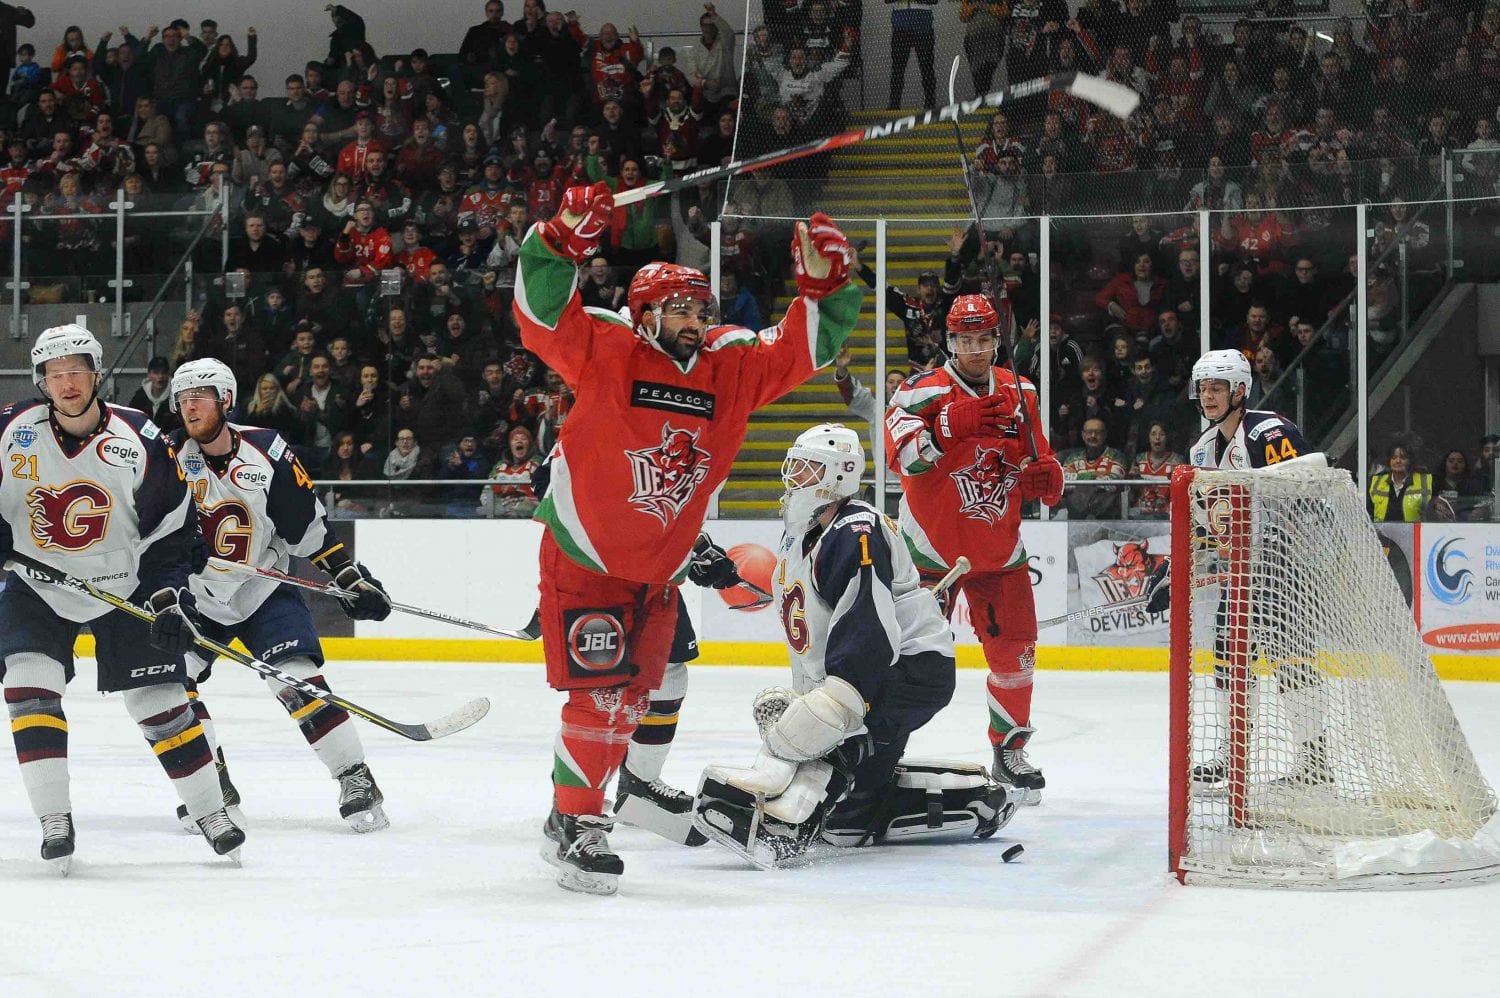 Picture 2 Sean Bentivoglio With His Hands Up After His Goal On Sunday As Matthew Myers Looks On , British Ice Hockey